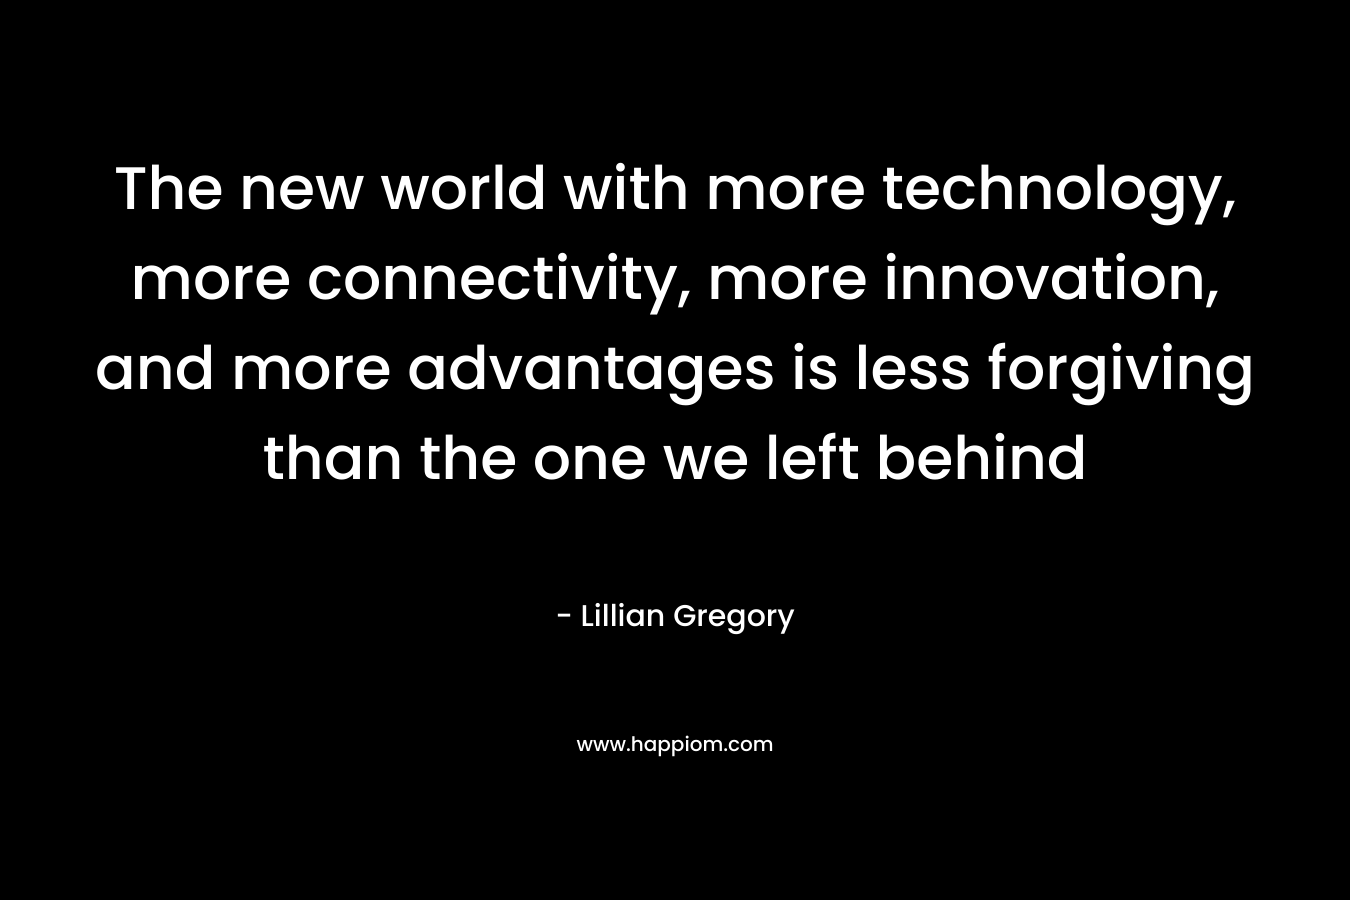 The new world with more technology, more connectivity, more innovation, and more advantages is less forgiving than the one we left behind – Lillian Gregory